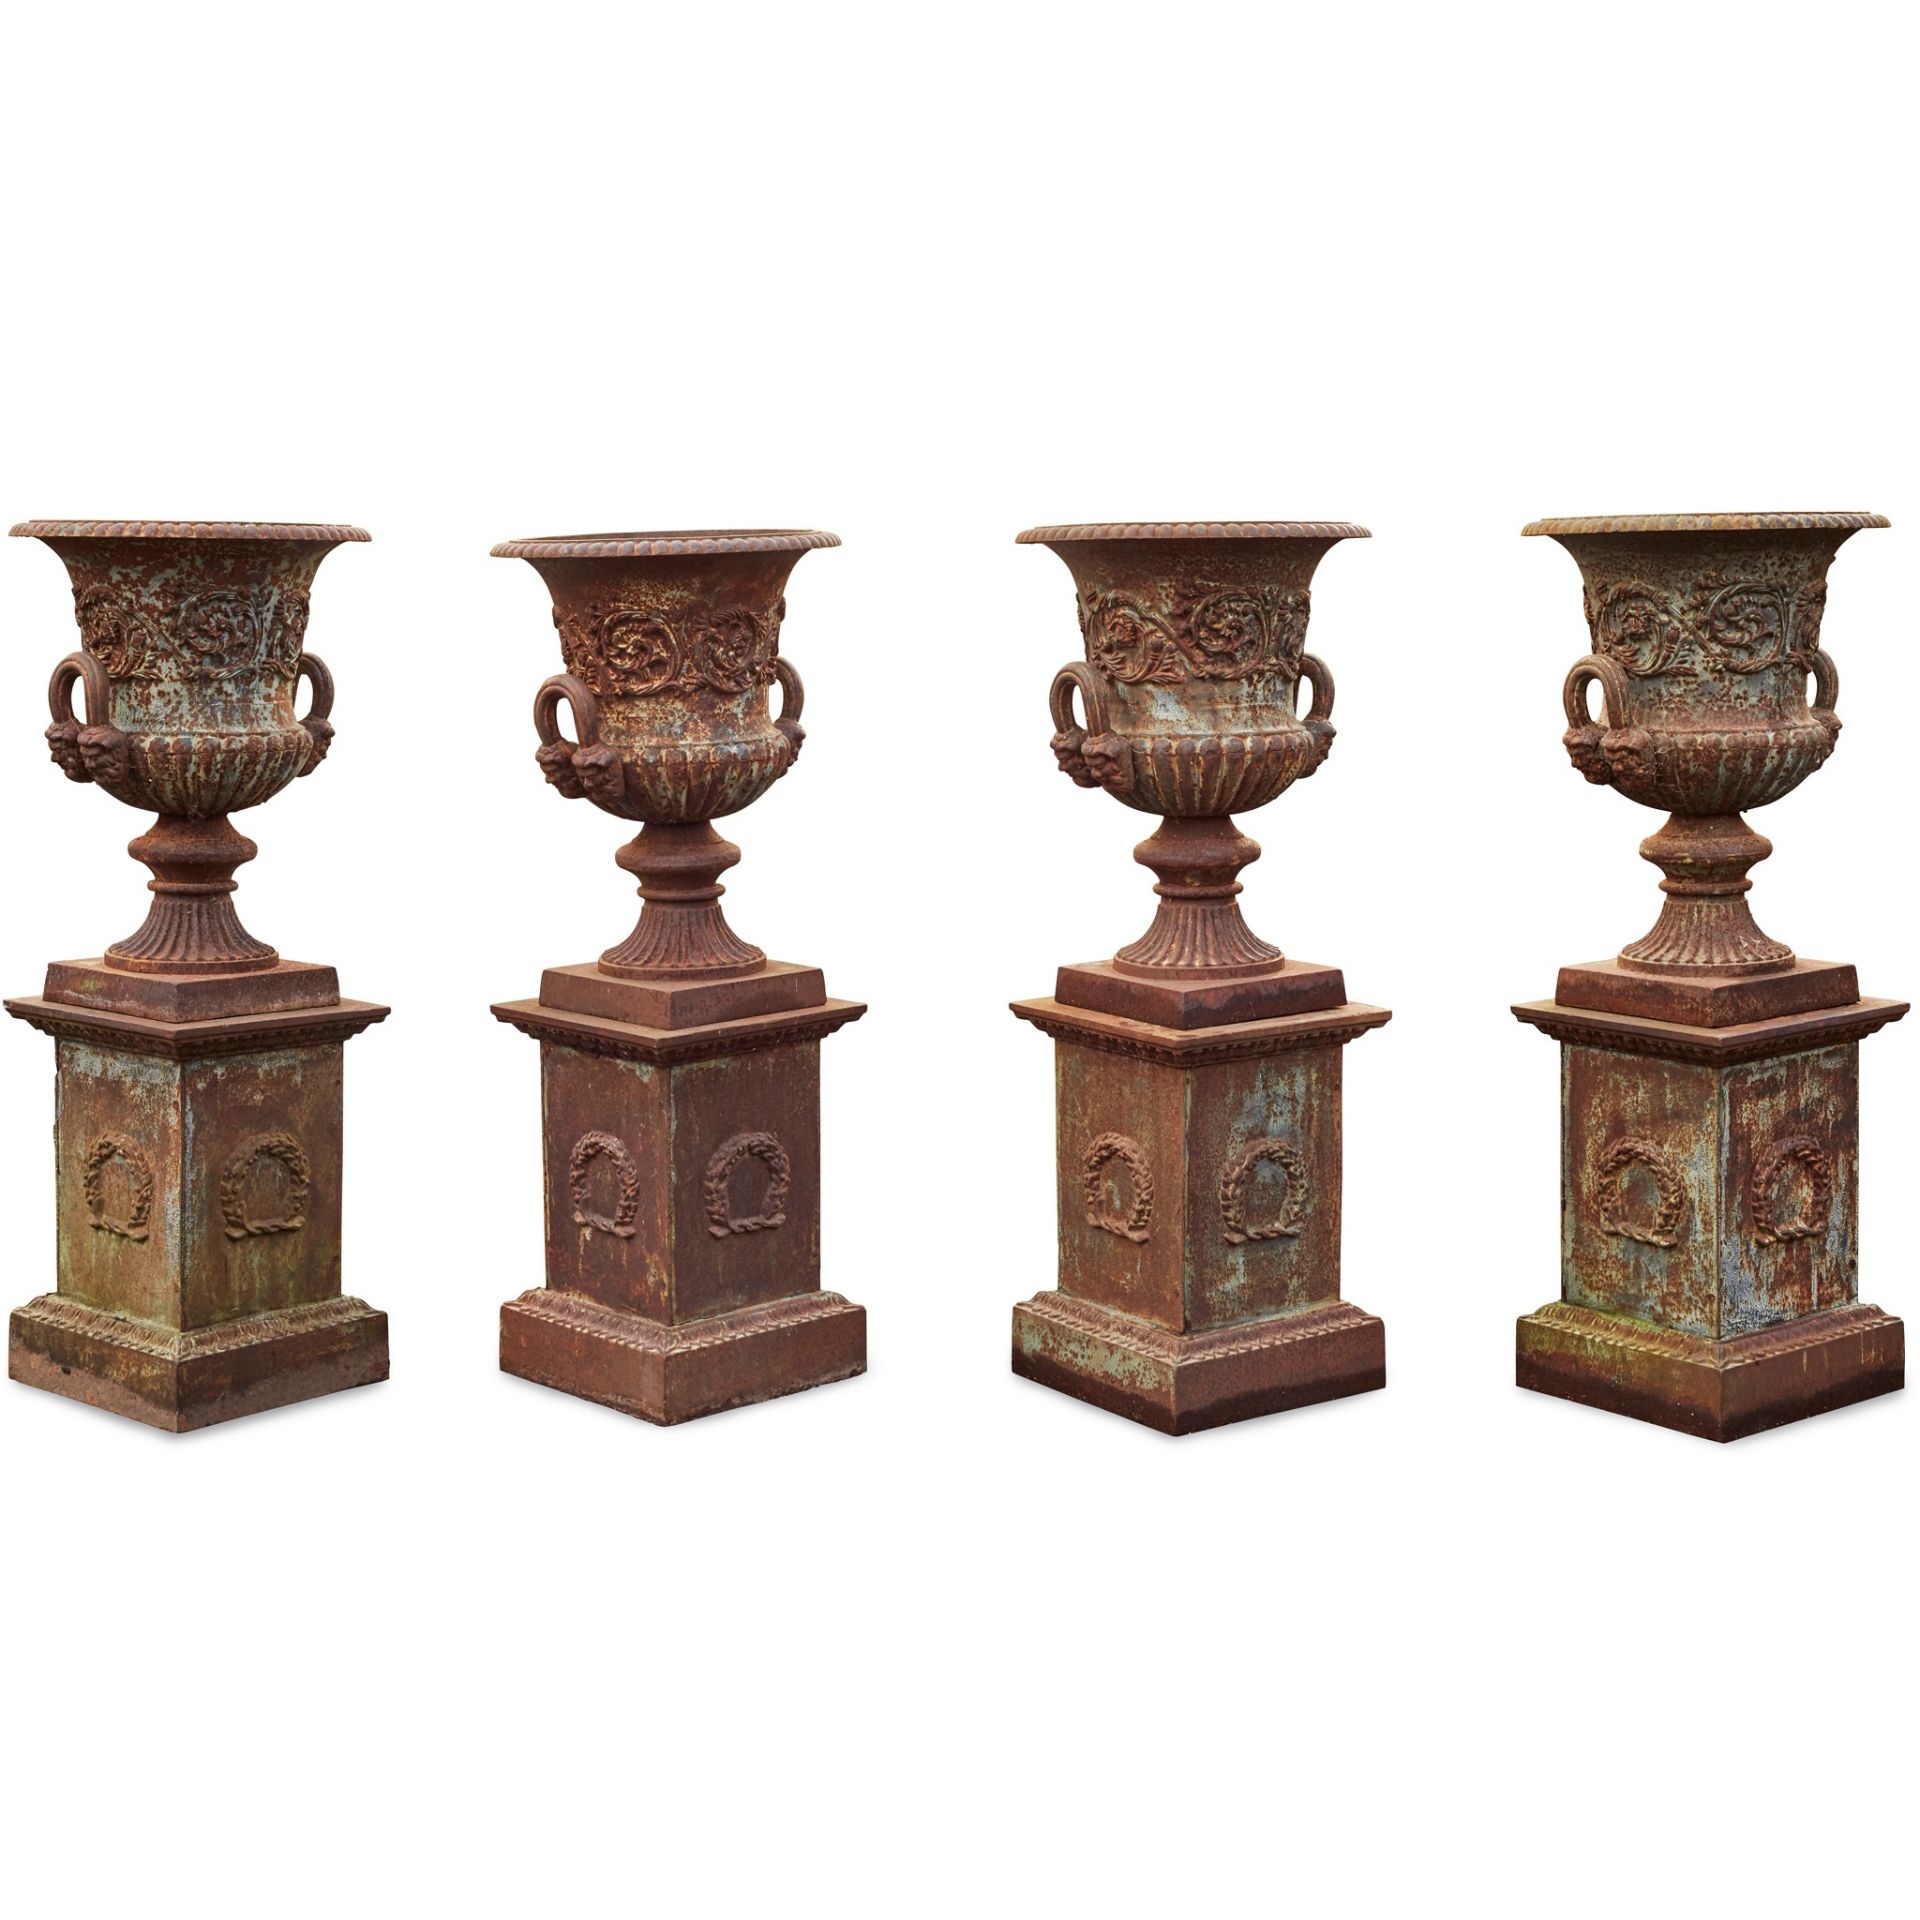 SET OF FOUR CAST IRON GARDEN URNS AND PLINTHS 20TH CENTURY